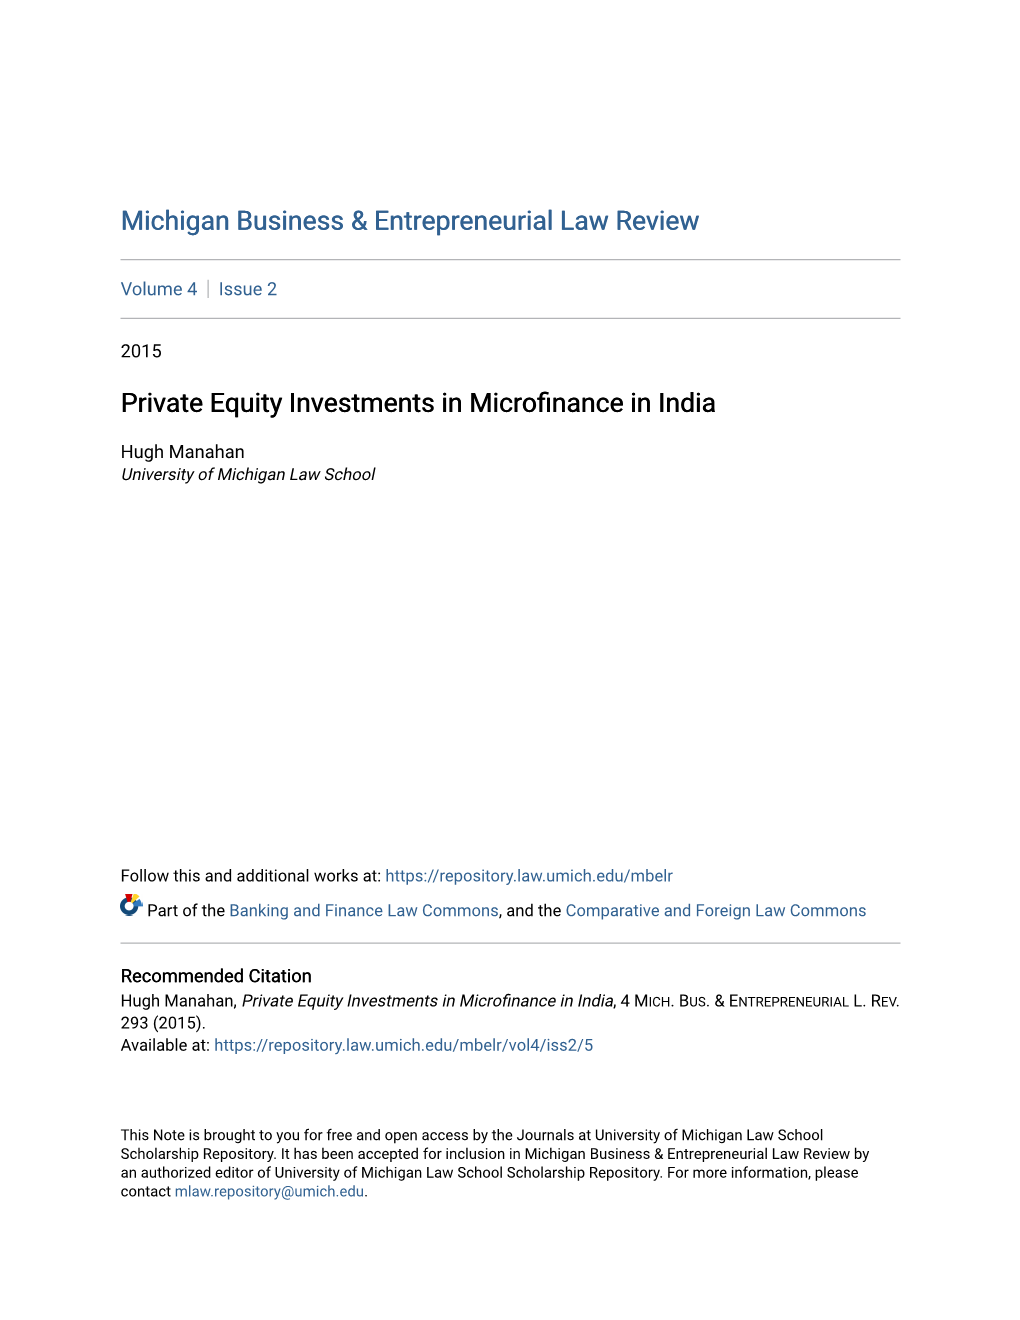 Private Equity Investments in Microfinance in India